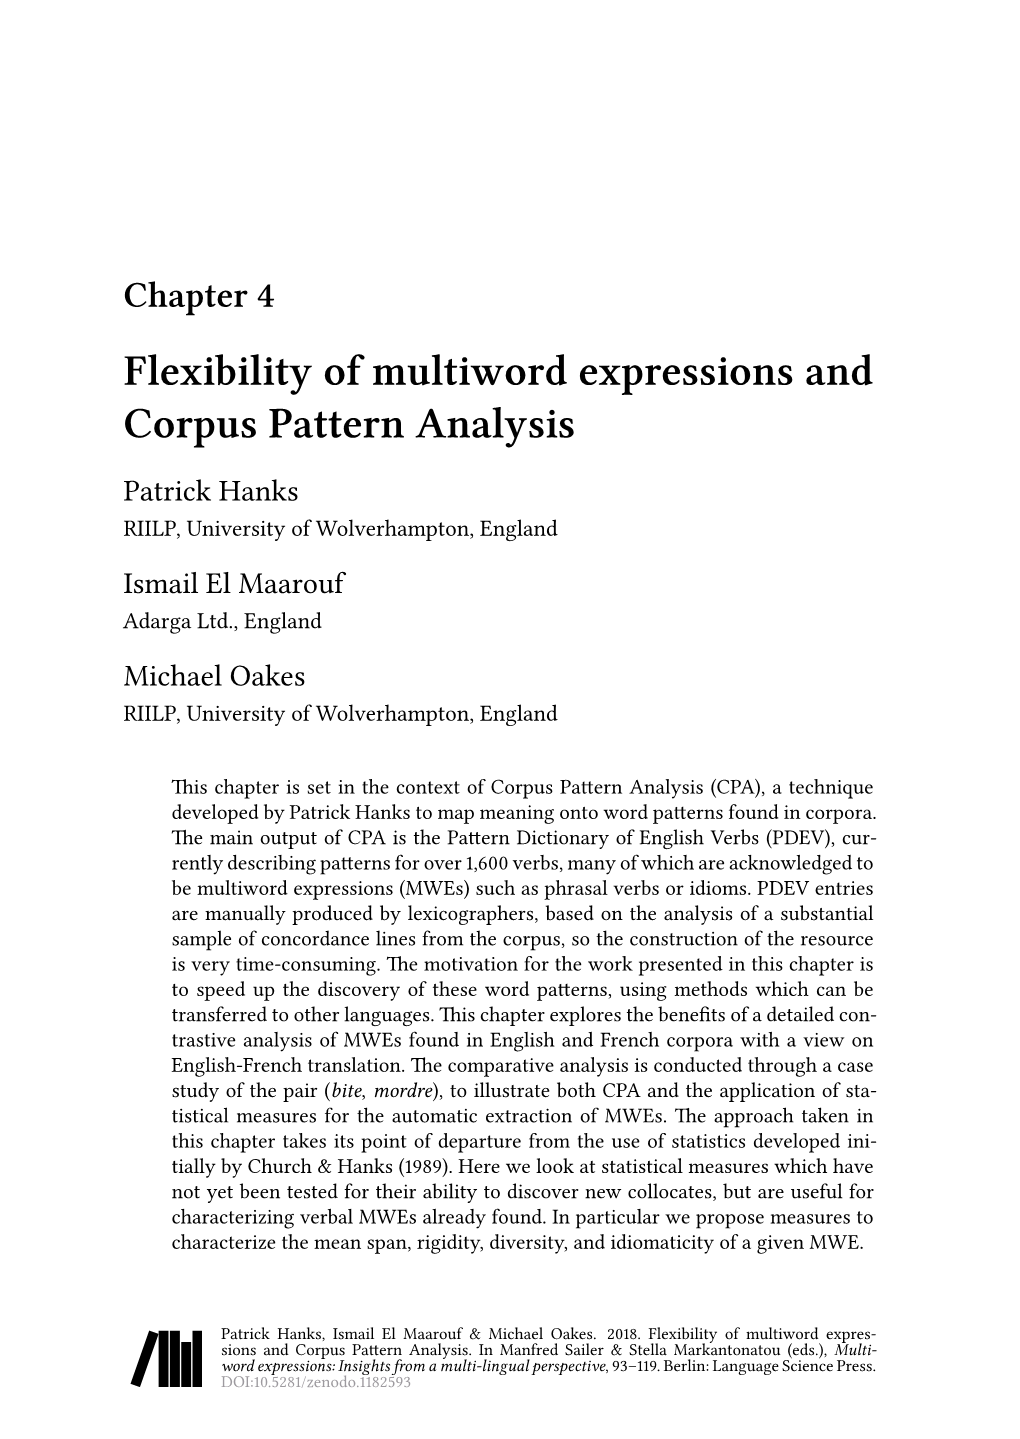 Flexibility of Multiword Expressions and Corpus Pattern Analysis